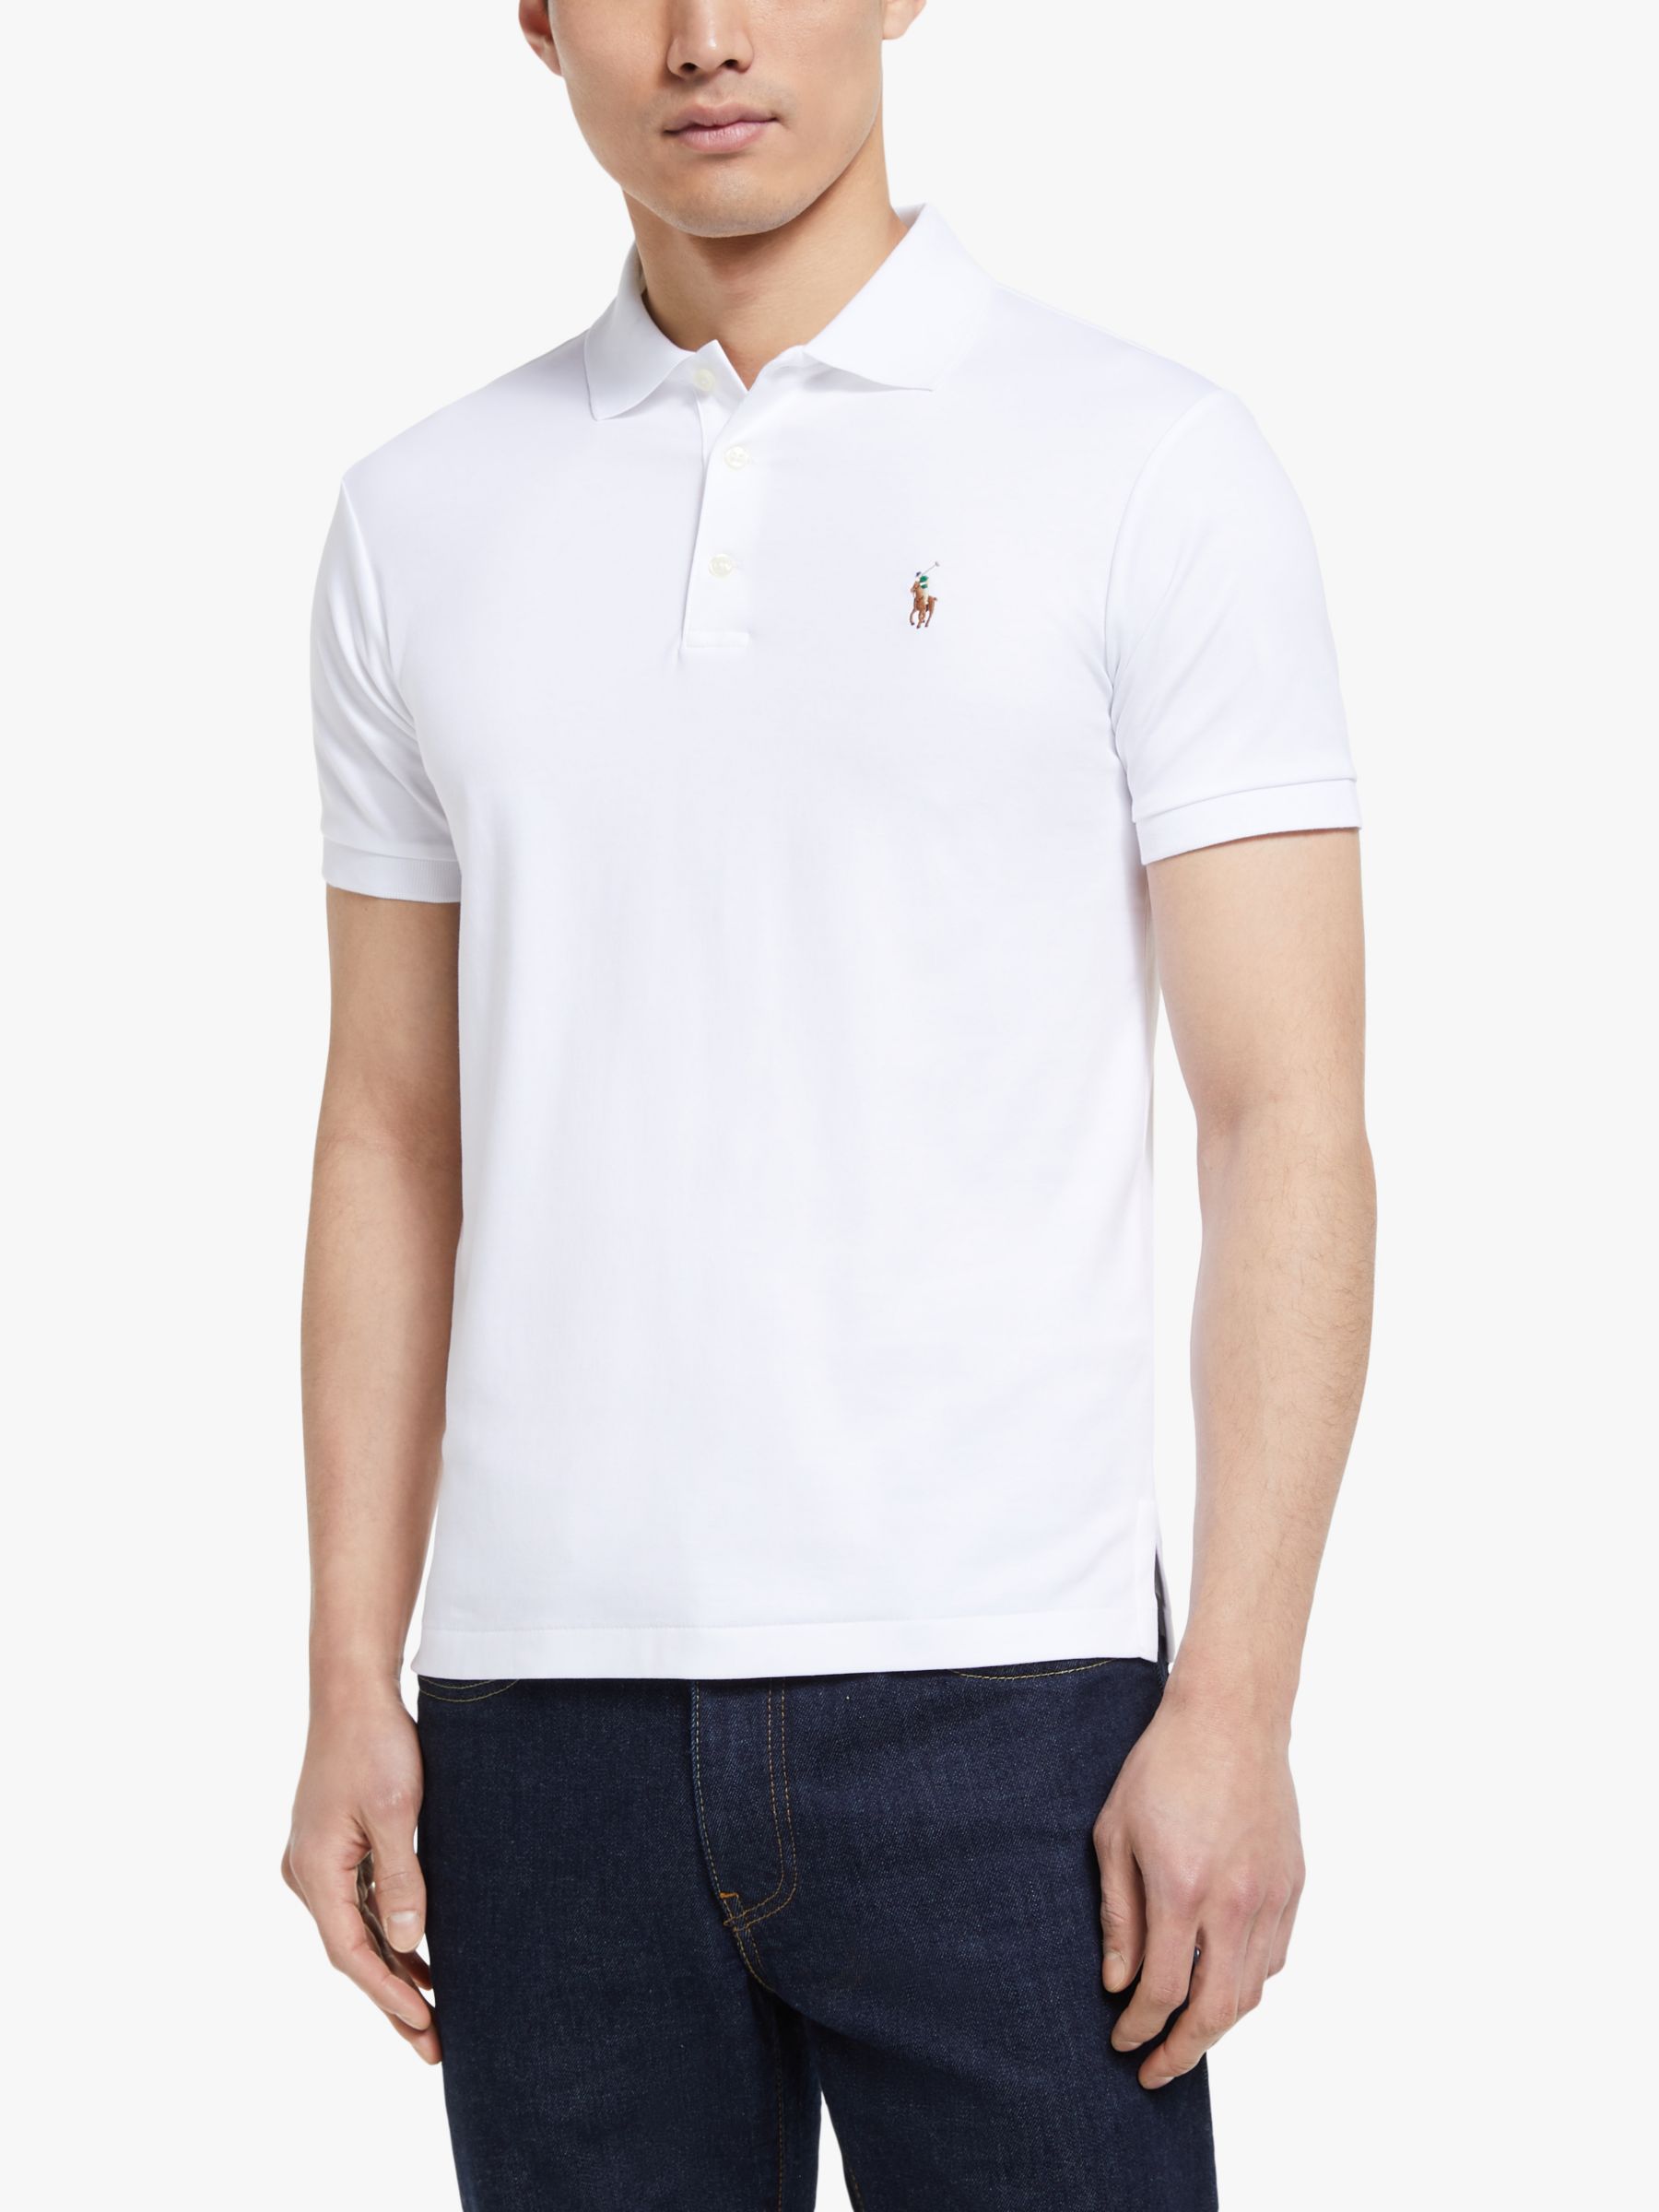 Polo Ralph Lauren Slim Fit Soft Touch Polo Shirt, White at John Lewis &  Partners